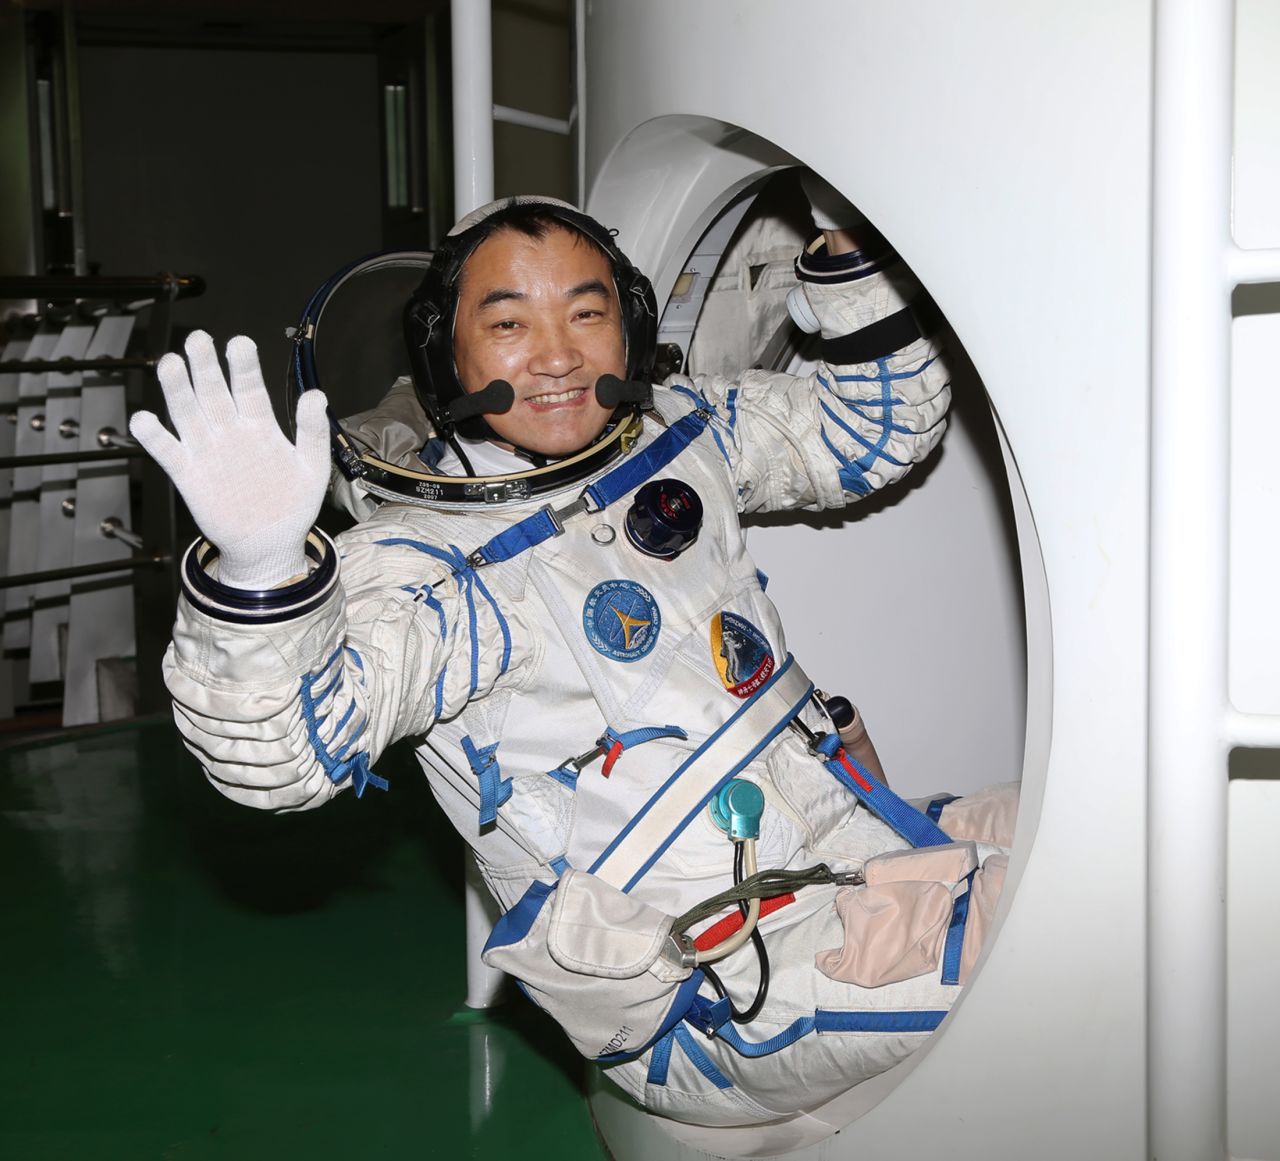 Zhang practices entering the return capsule on May 31, 2013.